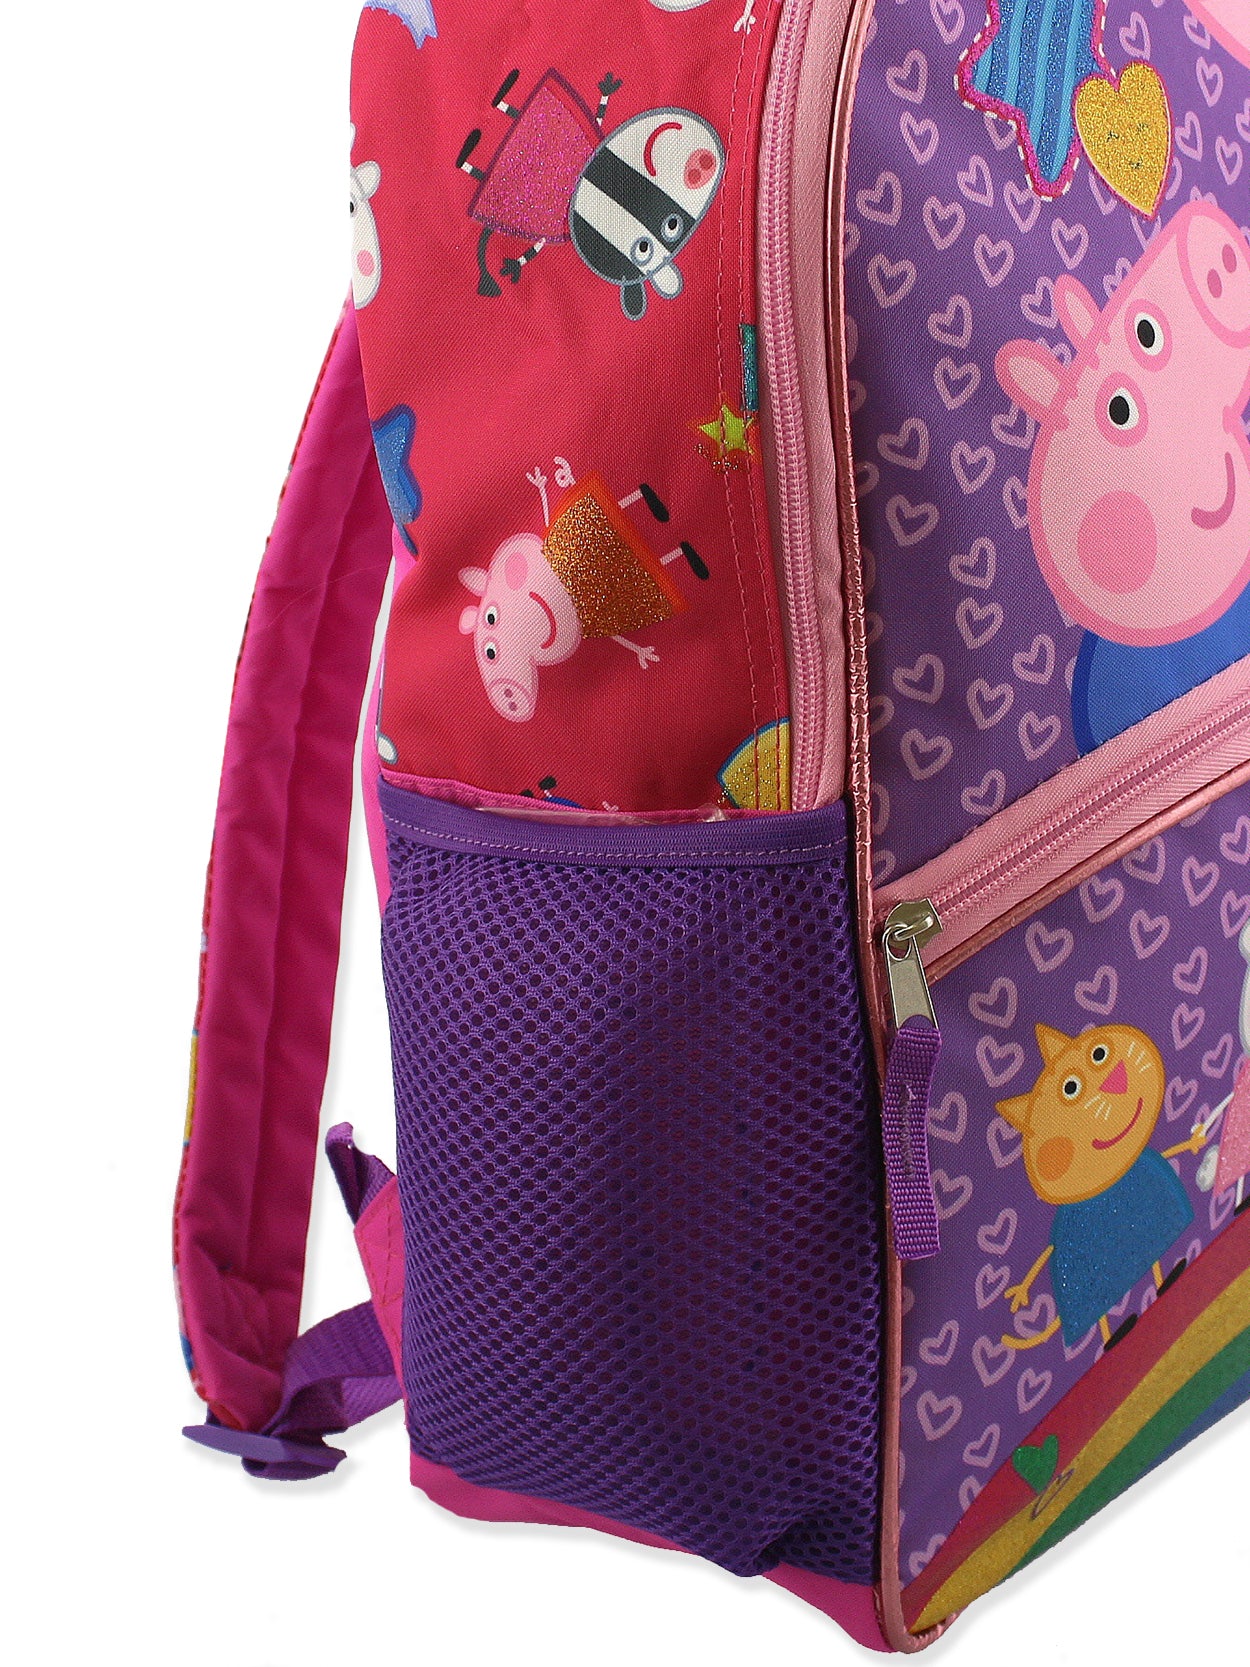 Screen Legends Peppa Pig Backpack and Lunch Box Set - Bundle with 15 Peppa  Pig Backpack, Lunch Bag, Tattoos, and More | Peppa Pig Backpack for Girls